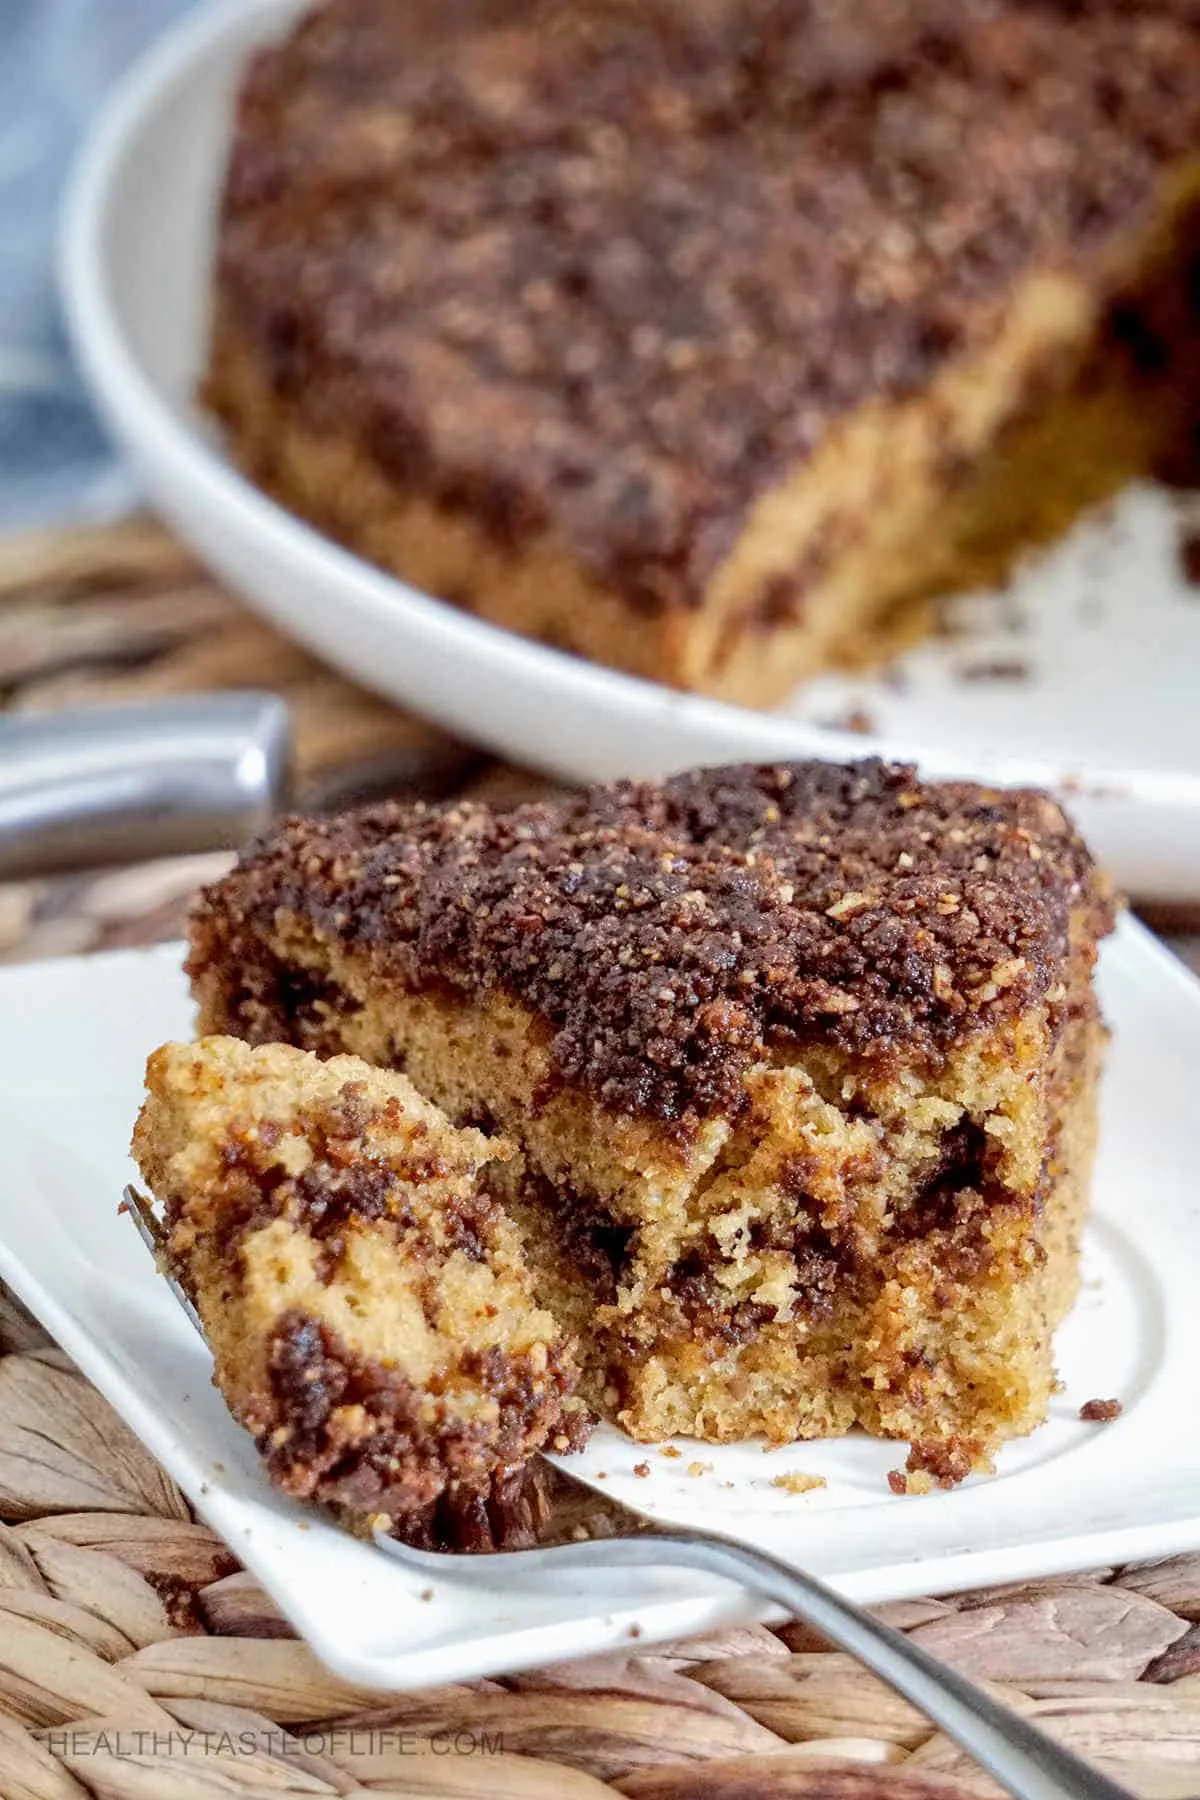 Dairy free gluten free coffee cake with cinnamon, walnut coffee crumb. A gluten free coffee cake recipe that you will enjoy again and again. Its easy, moist, fluffy and stays like this for days! #glutenfreecoffeecake #dairyfree #glutenfree #refinedsugarfree #coffeecake